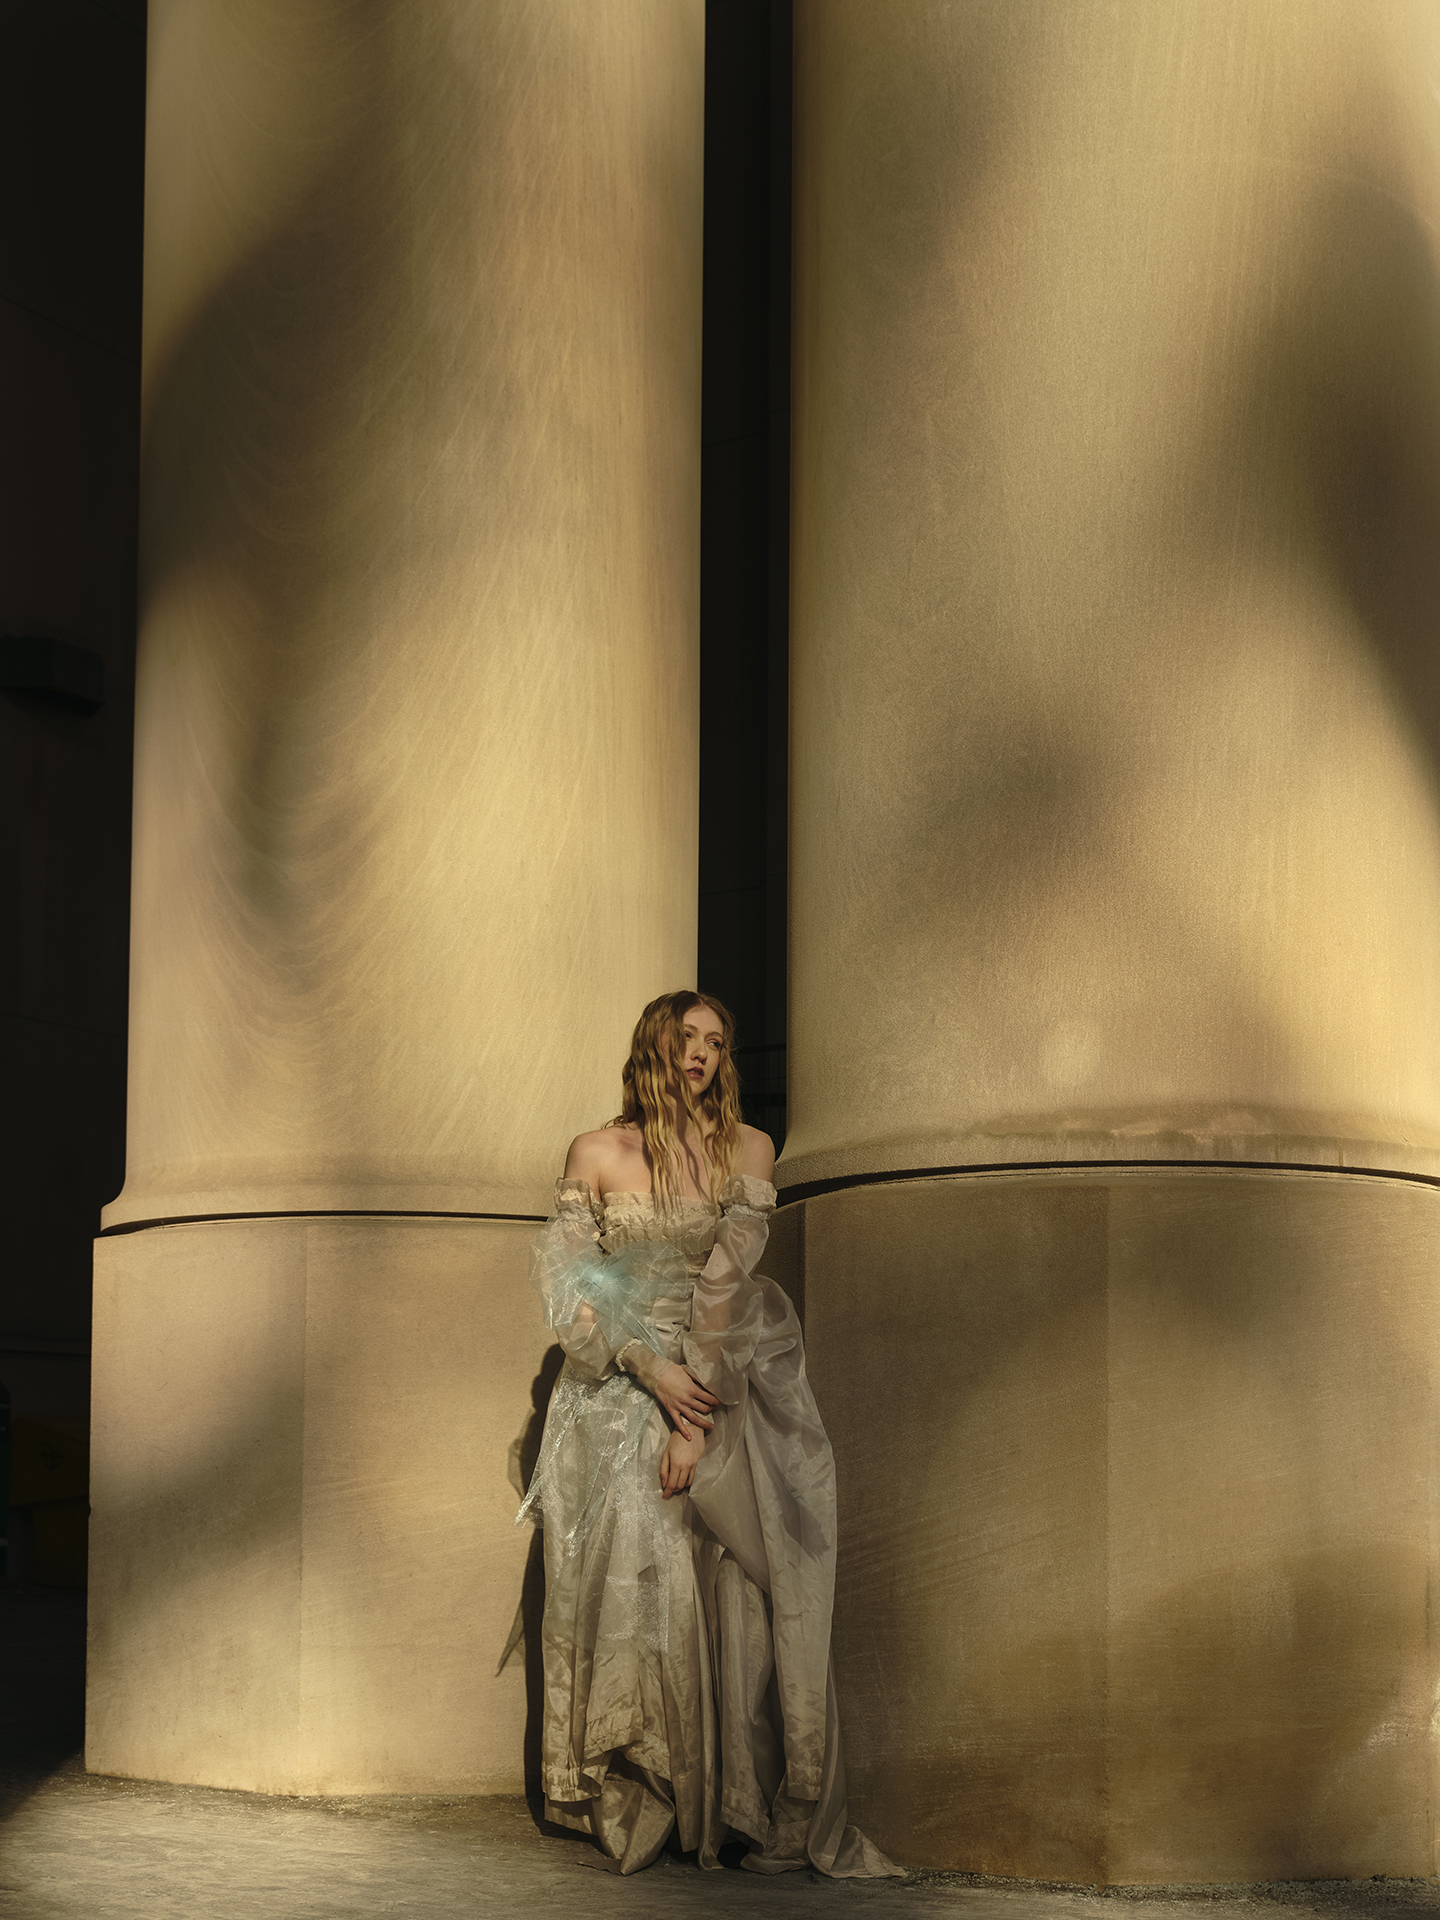 In this image, a Caucasian young woman is leaning against one of two pillars in the photo. The speckled creates a painterly effect on the pillars and adds separation between the subject and the background. She is wearing a seer and shiny dress with many layers, typical for the 18th century. Her blond hair softly blows in the wind as she gazes to the right.